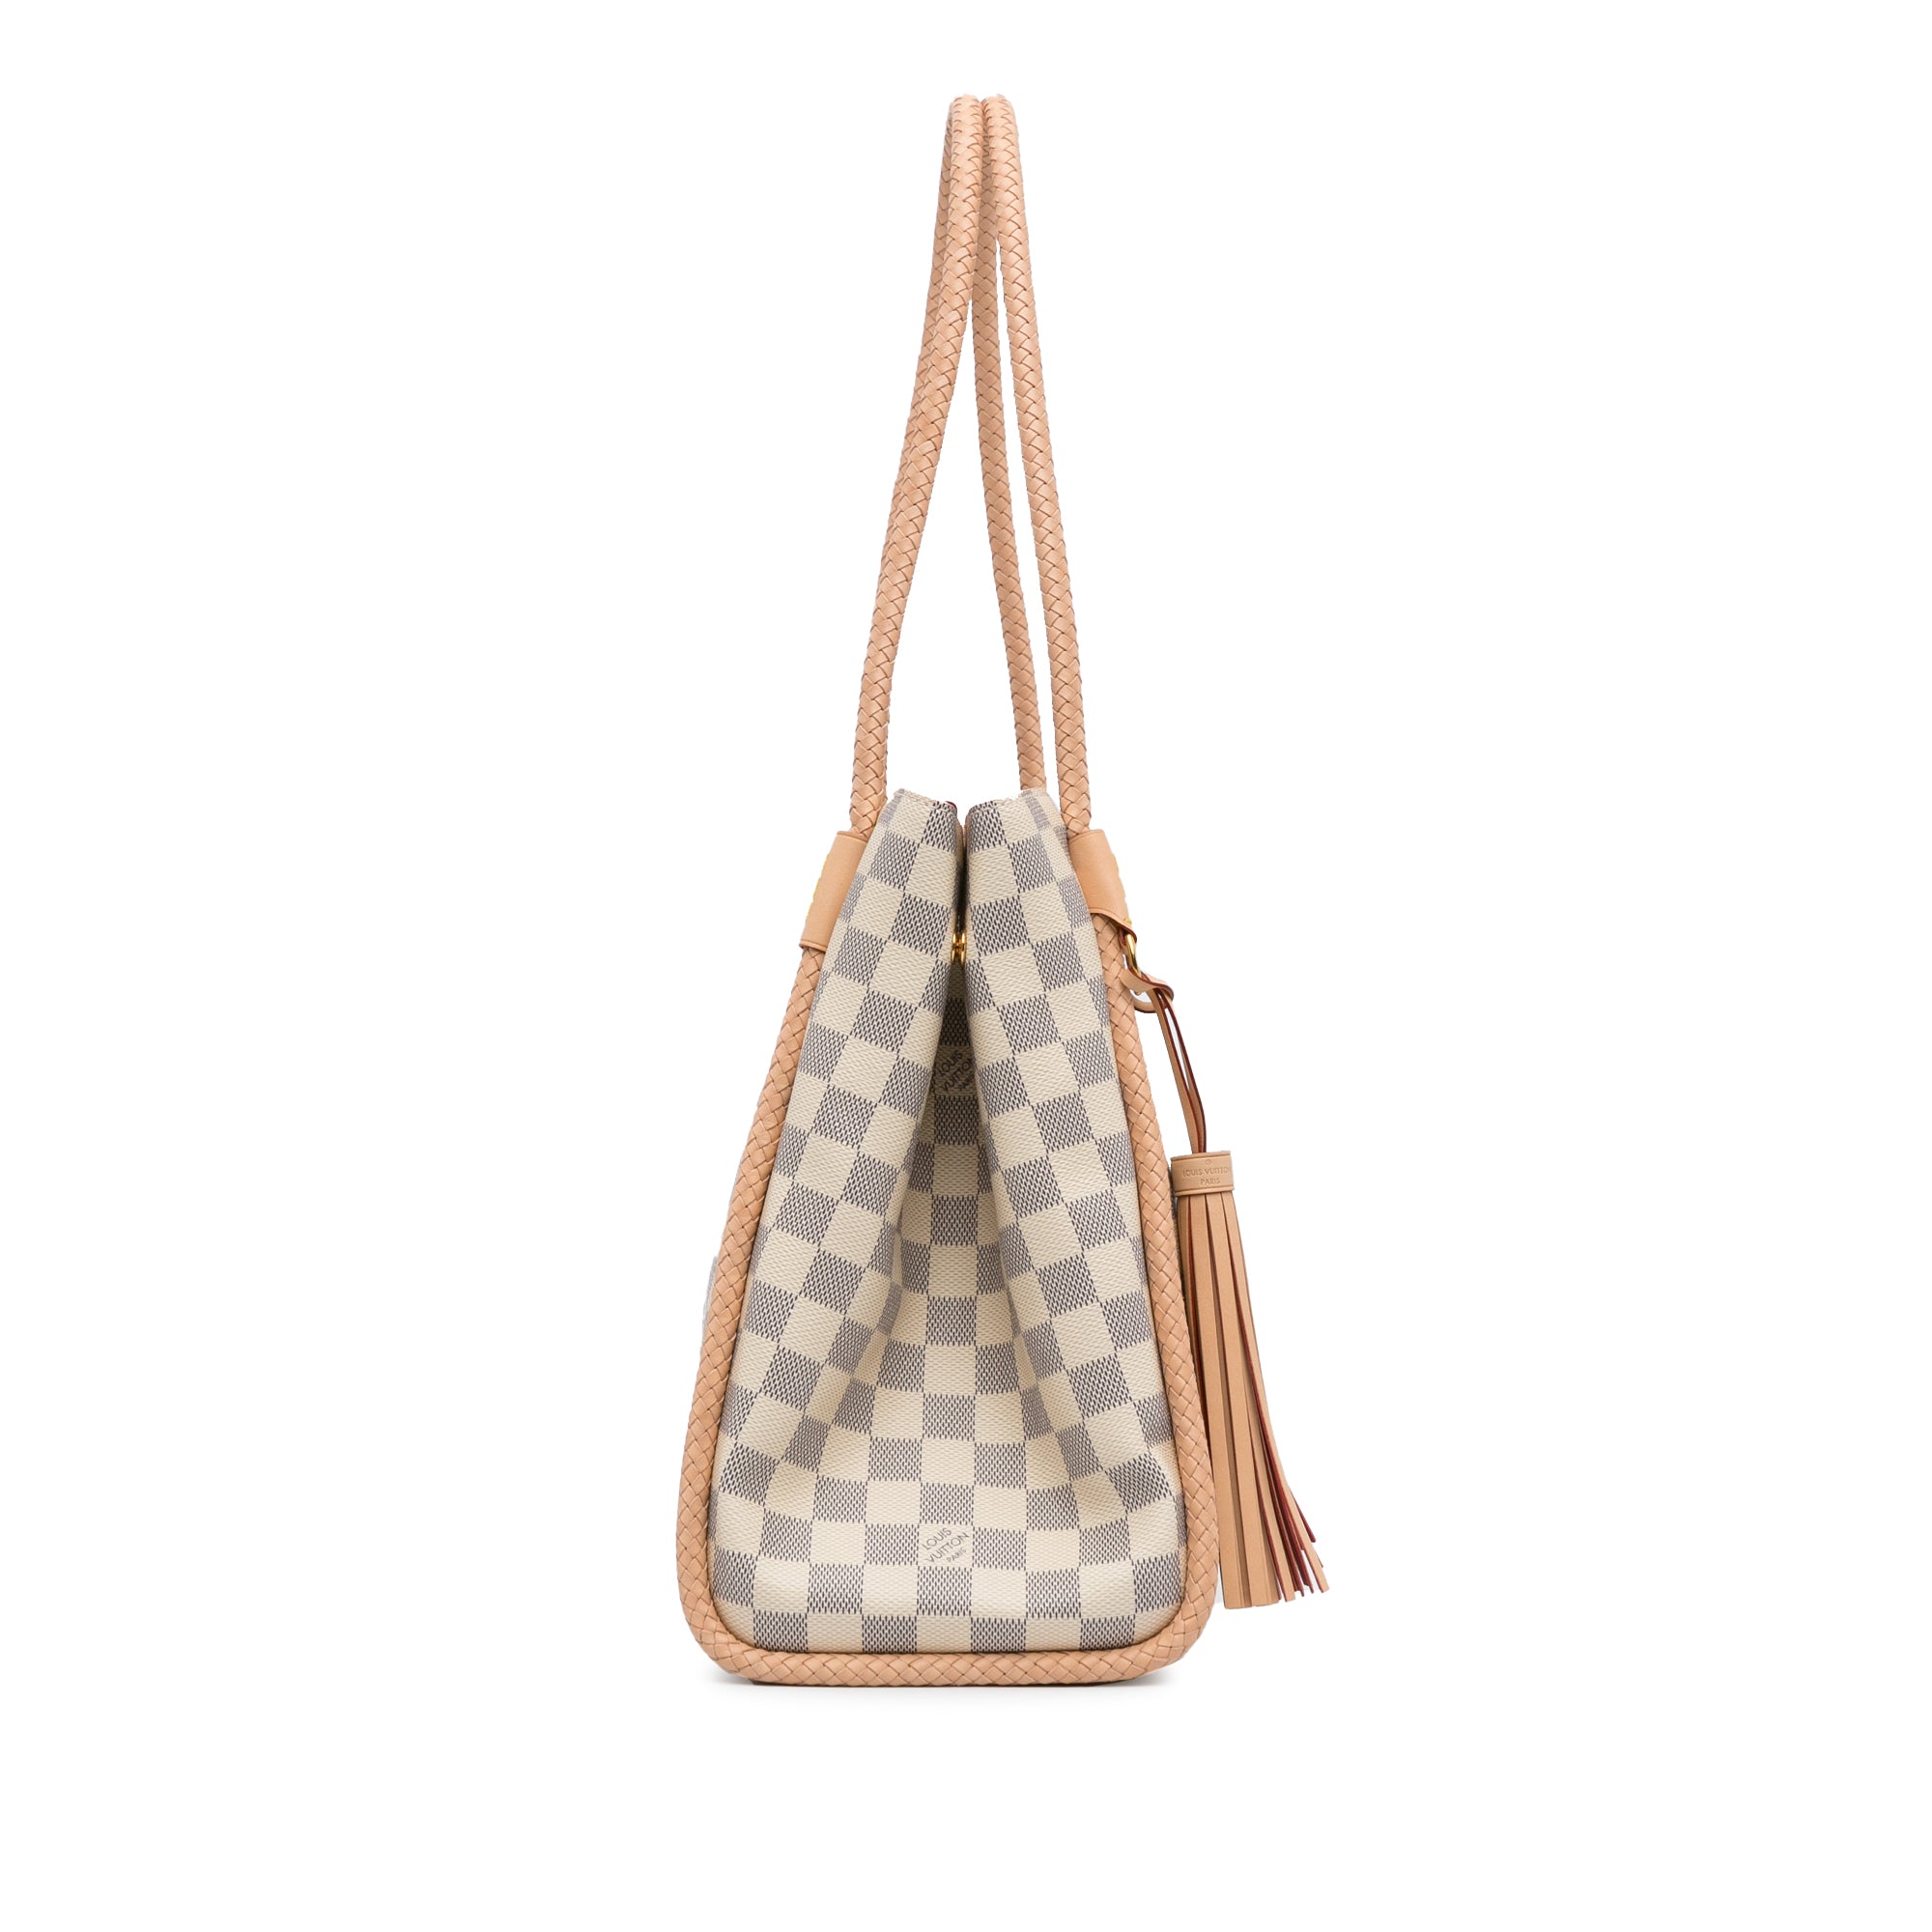 Propriano leather handbag Louis Vuitton White in Leather - 38112563